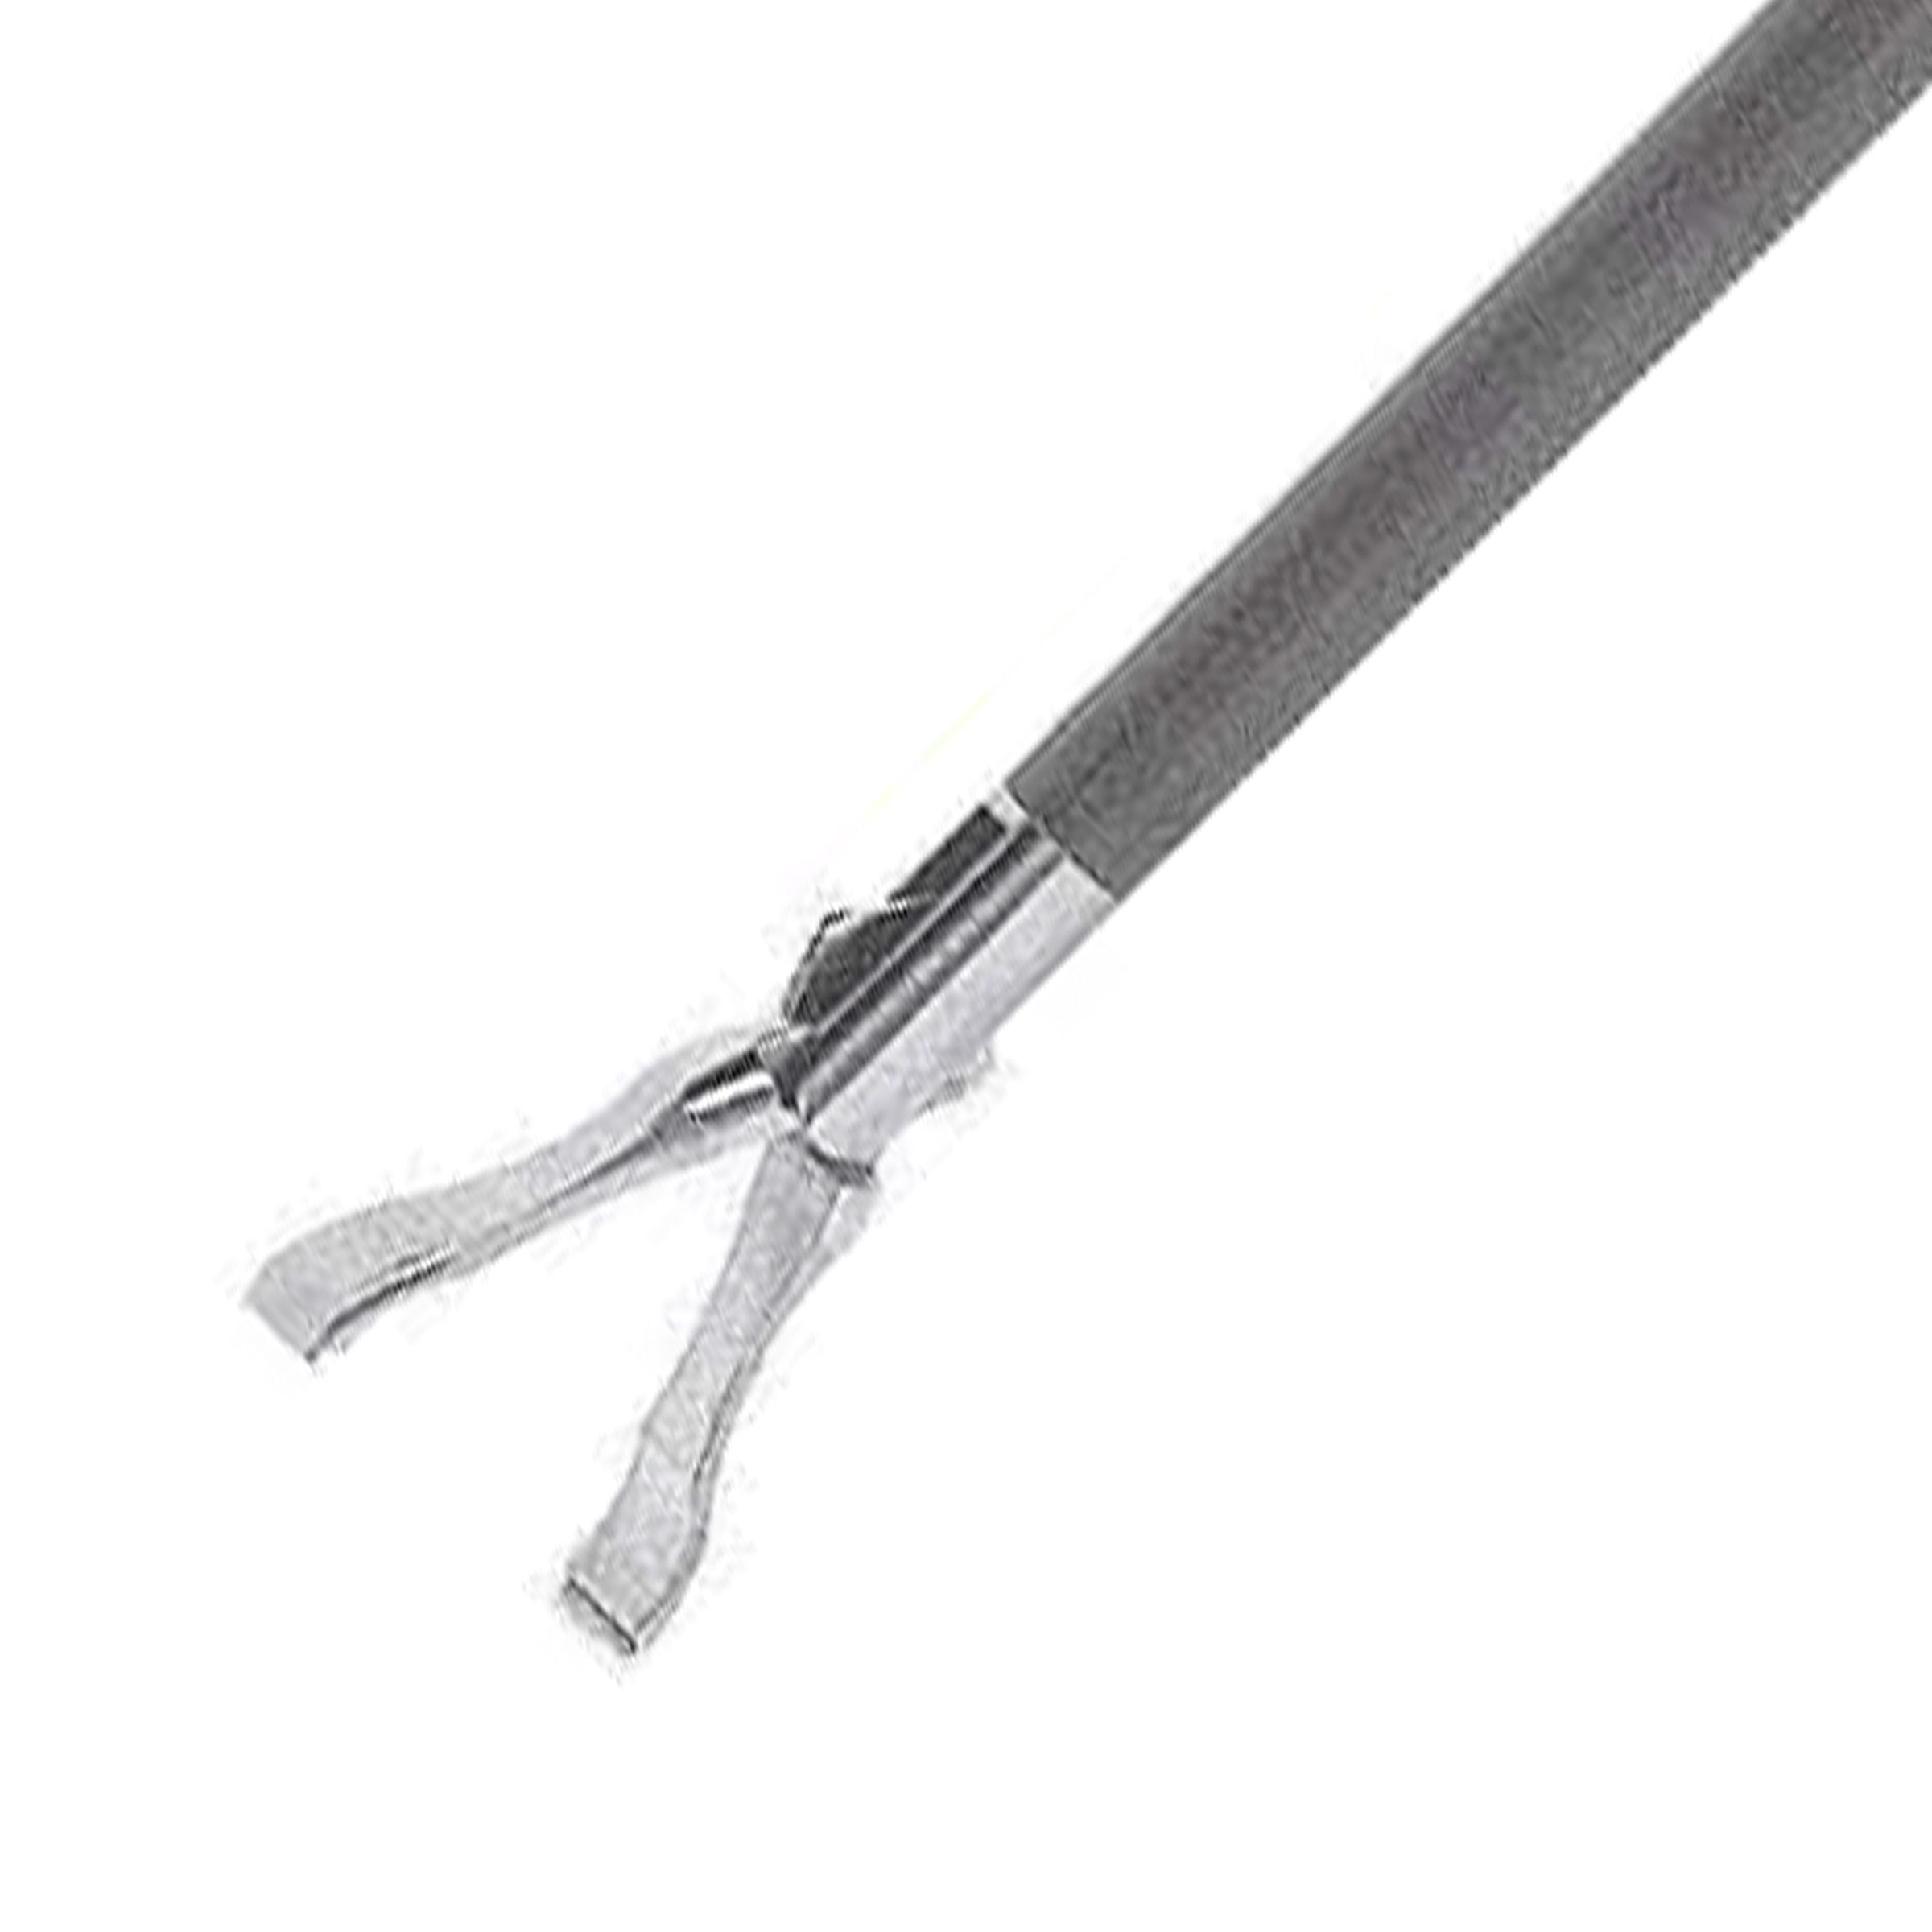 Stryker Laparoscopy Ratchet Handle with Double Action Claw Insert